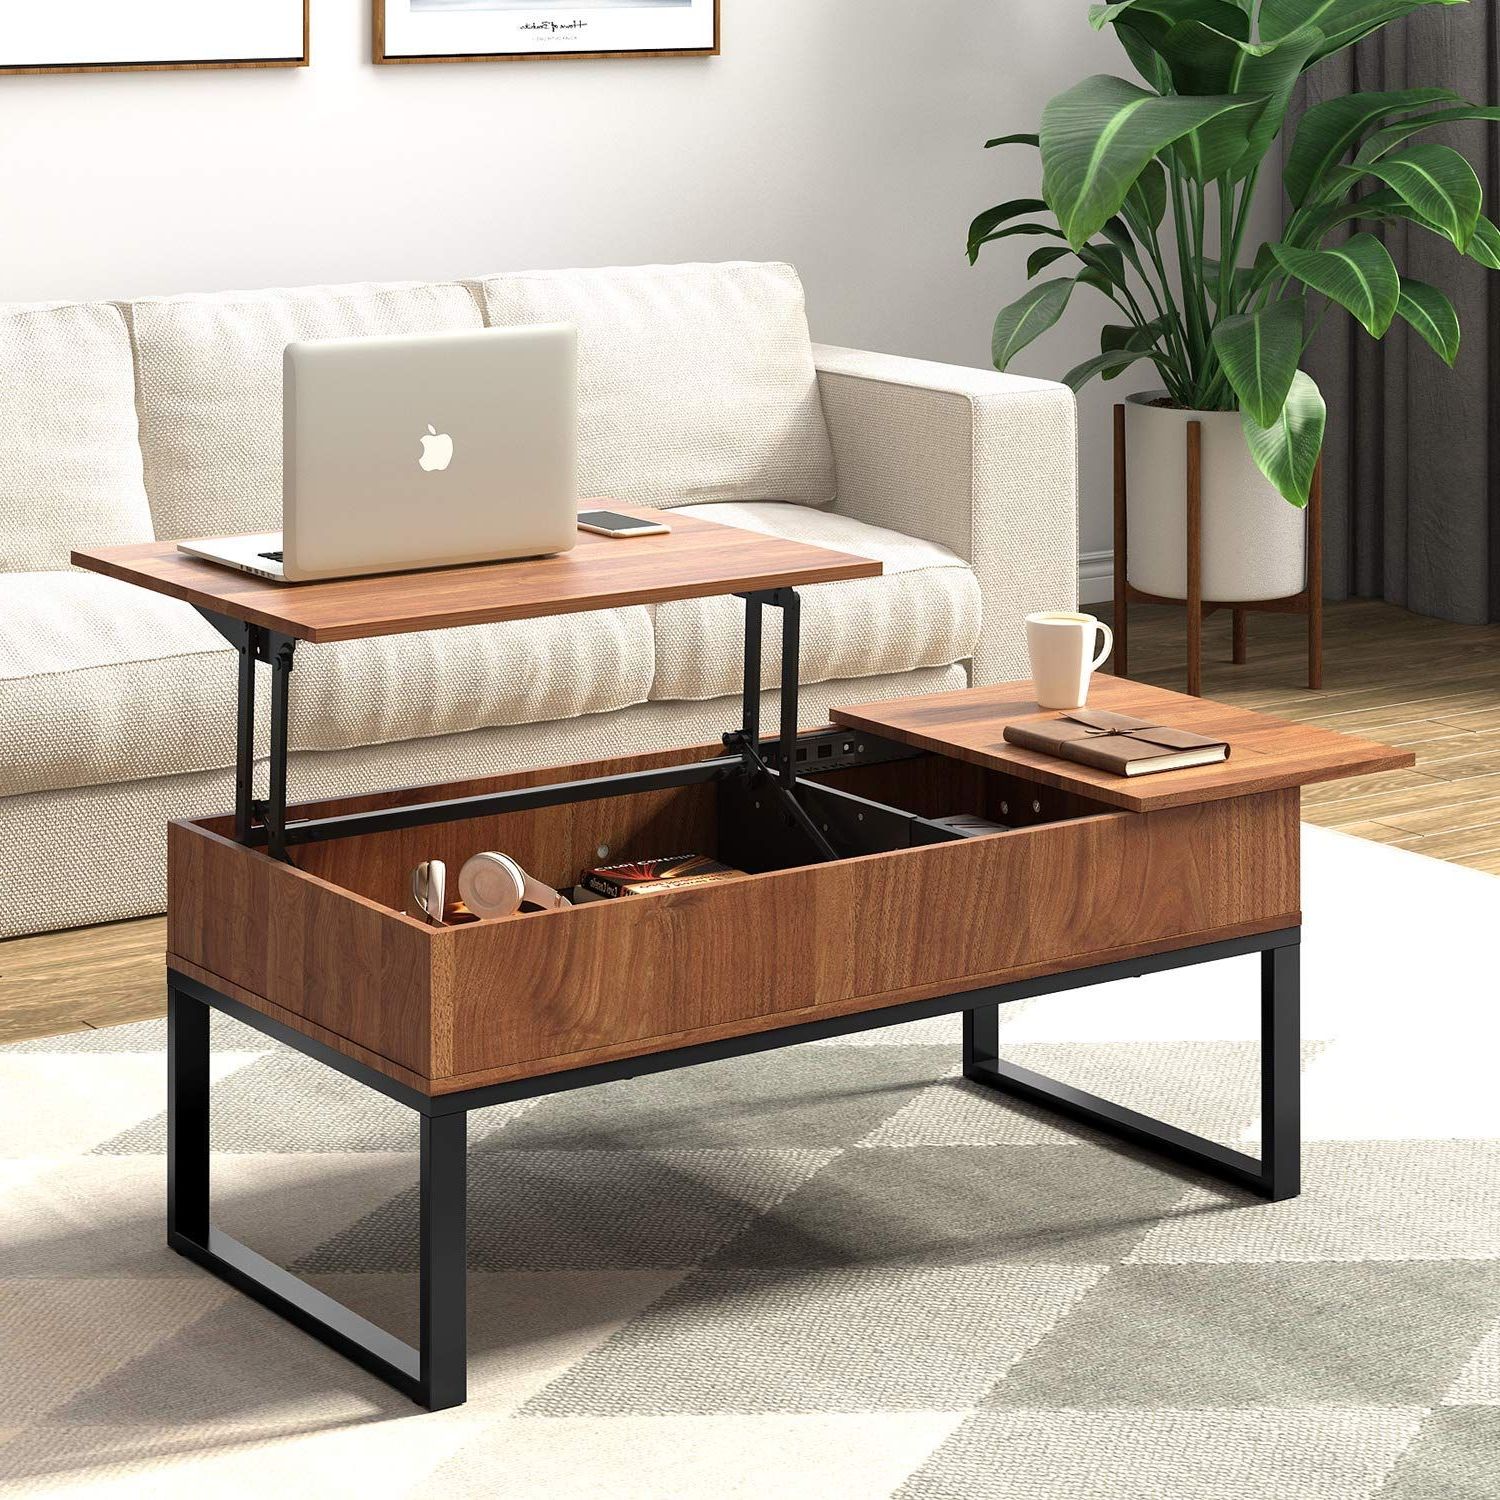 Popular High Gloss Lift Top Coffee Tables Inside Wlive Wood Coffee Table With Adjustable Lift Top Table, Metal Frame (View 11 of 15)